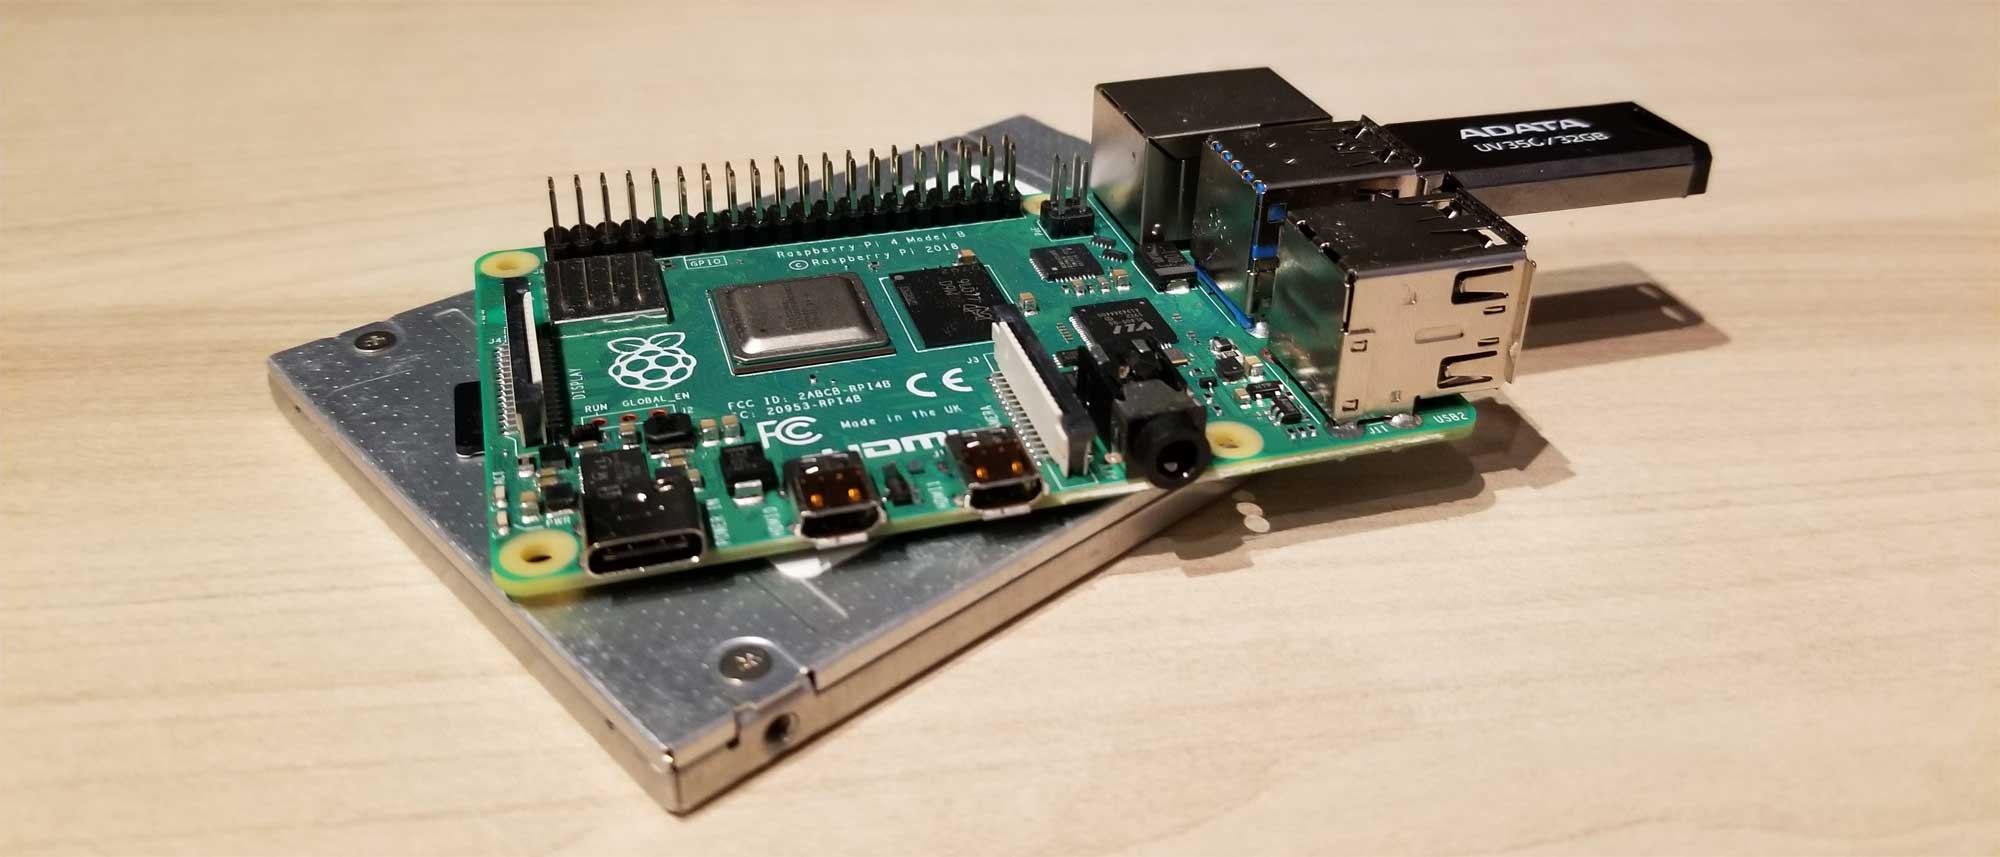 Maid Can be calculated despise How to Boot Raspberry Pi 4 / 400 From an SSD or Flash Drive | Tom's Hardware